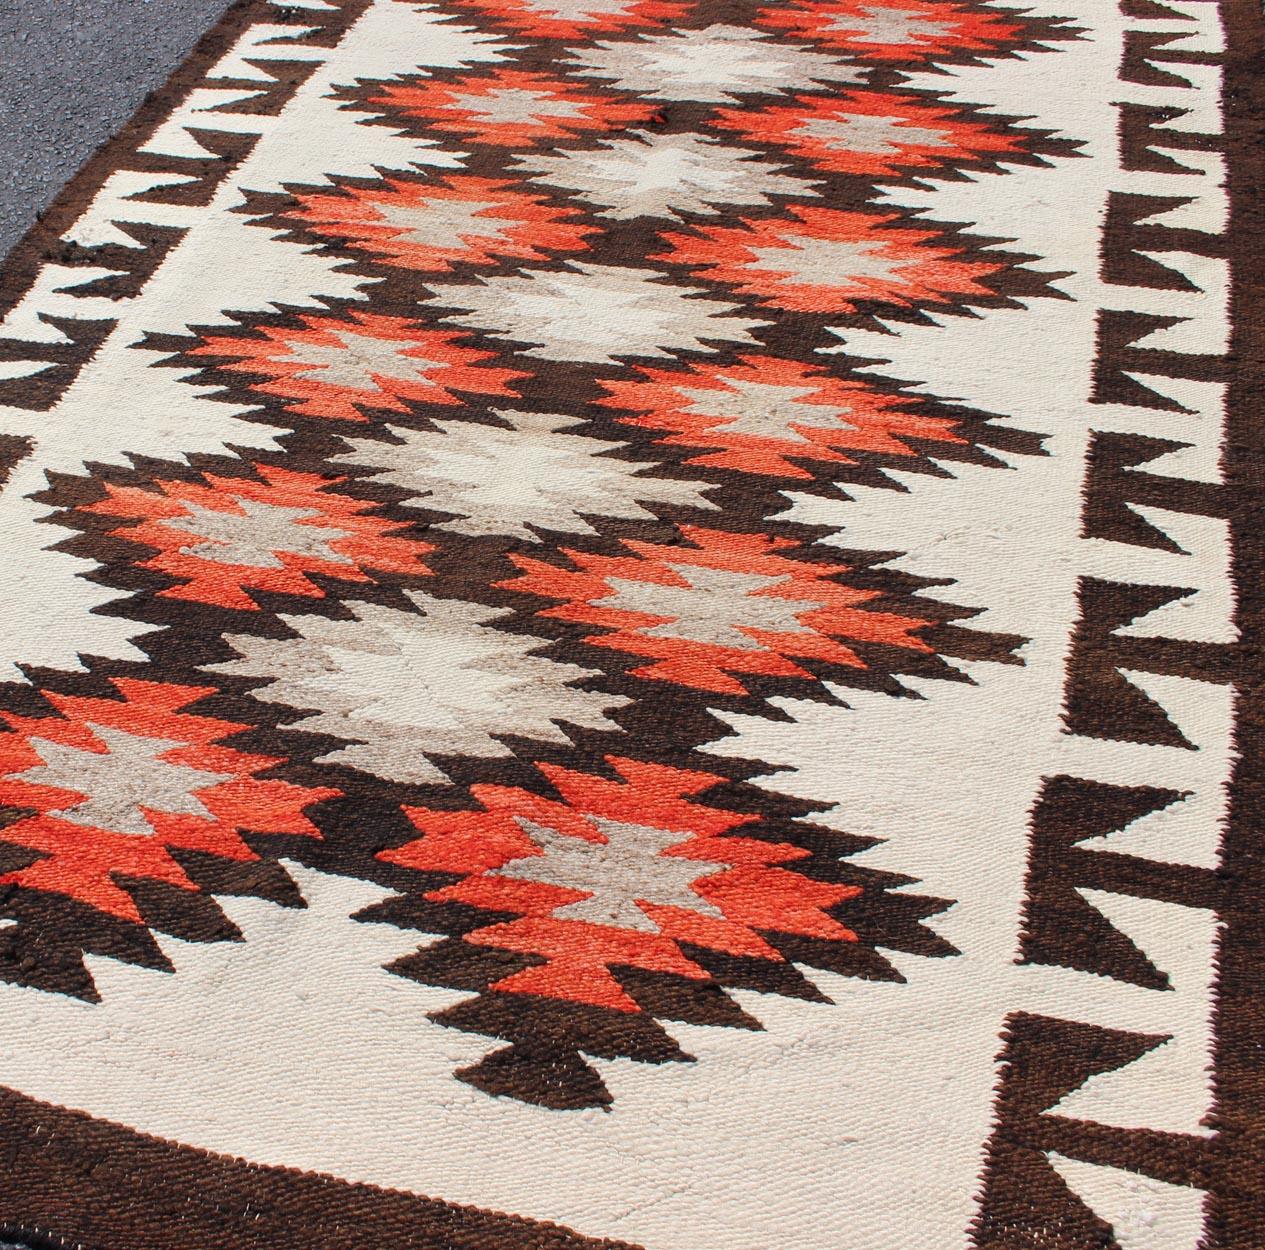 Vintage American Navajo Tribal Rug with Diamonds in Brown, Orange and Ivory For Sale 2